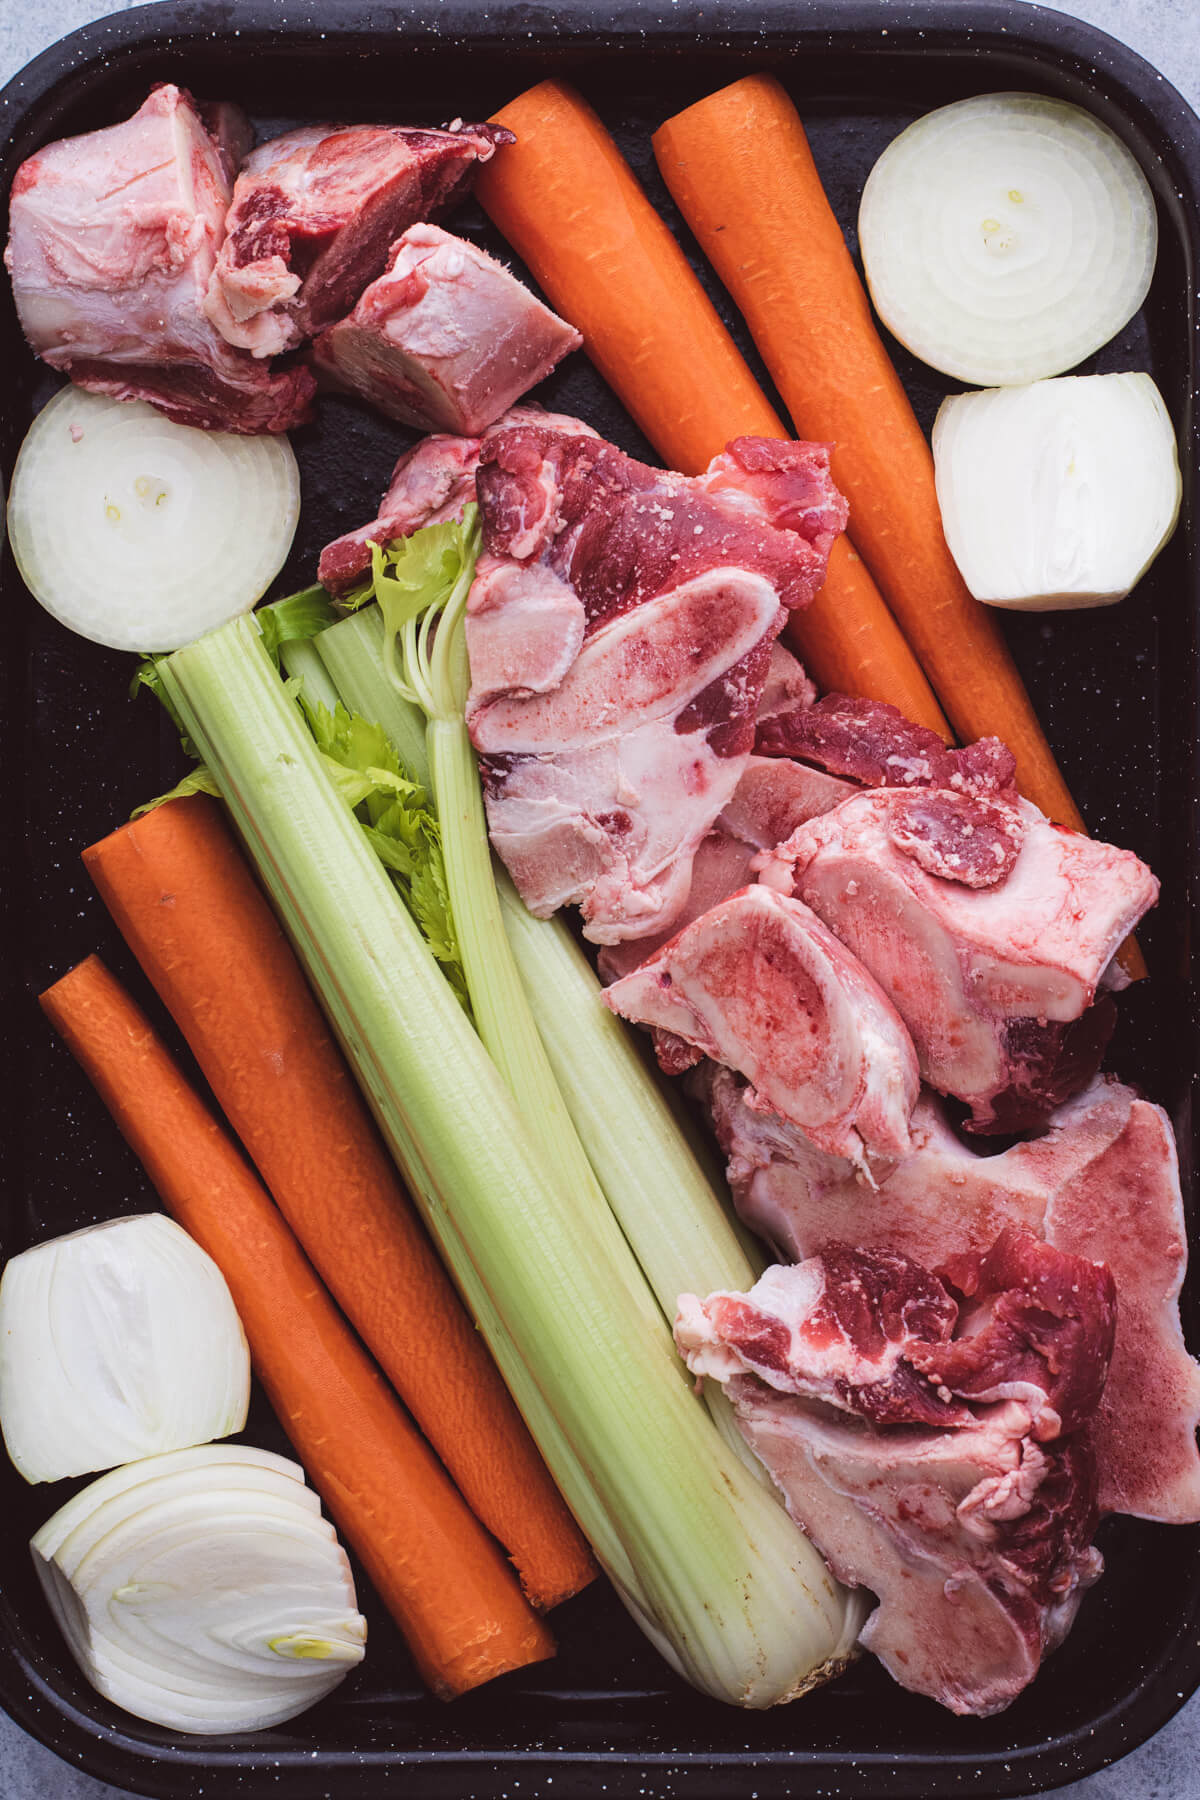 A roasting pan filled with raw veggies and meaty beef soup bones.